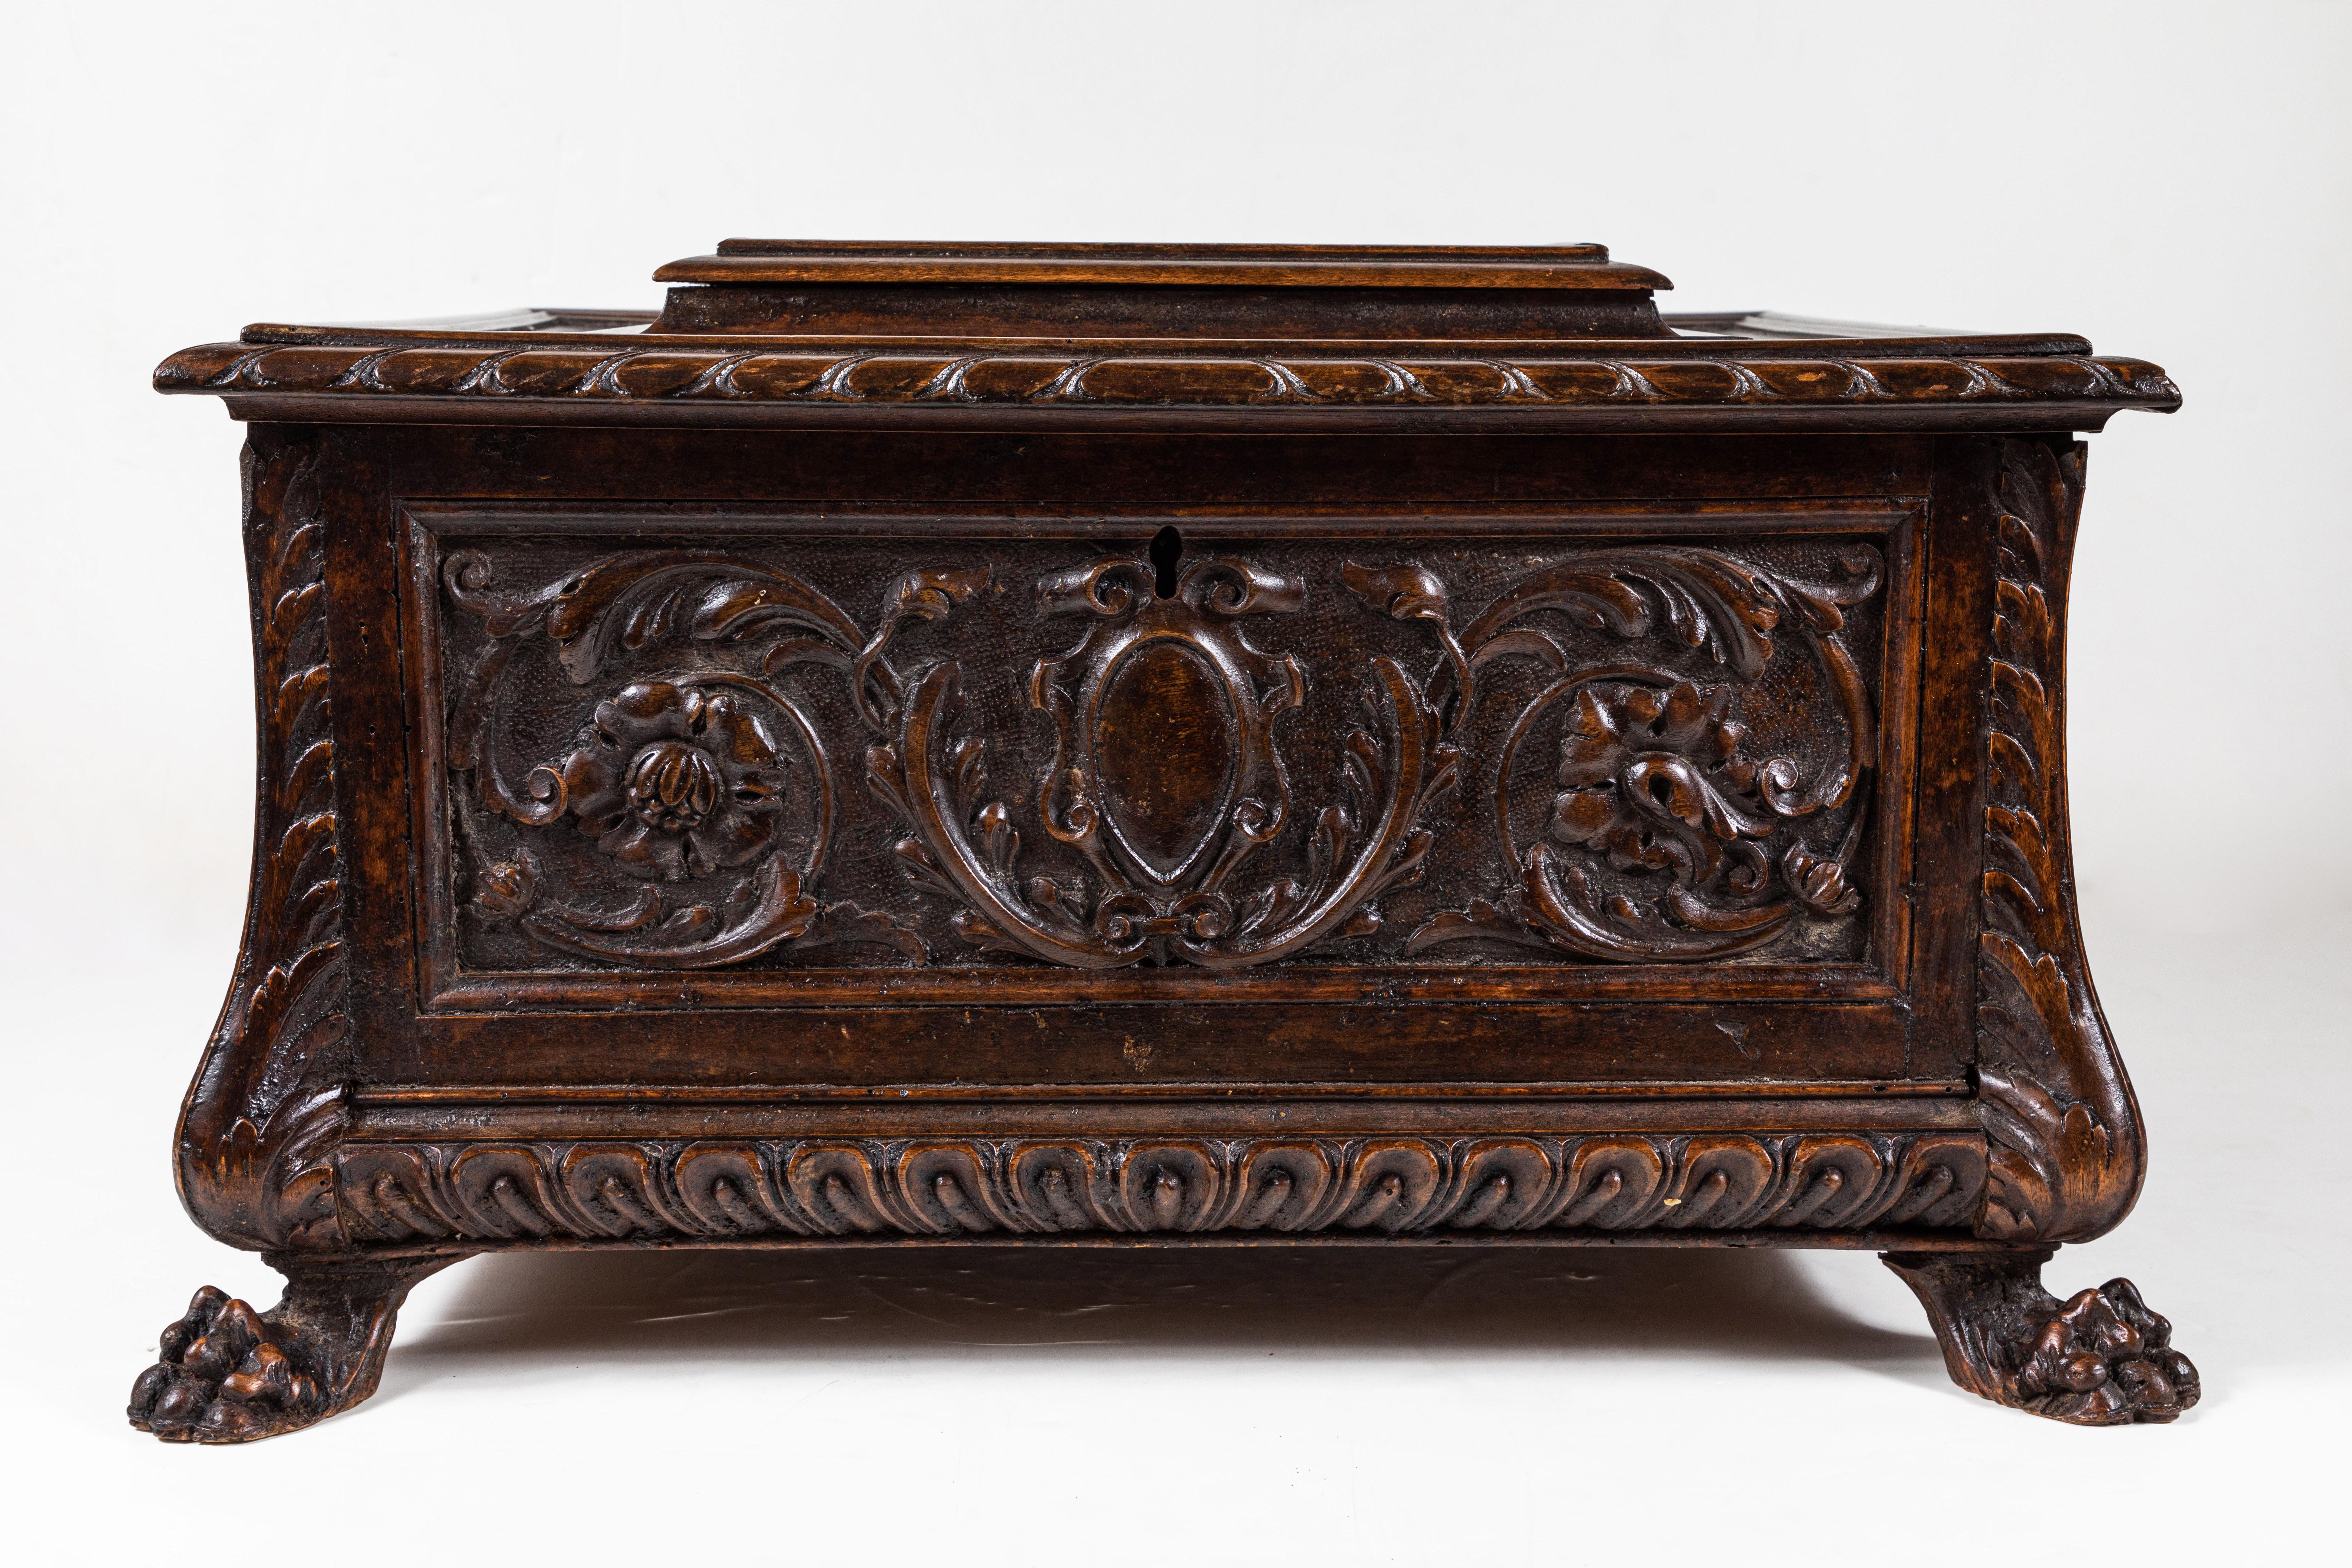 Grand, lidded, hinge-top, richly carved walnut coffer embellished with four panels of reliefs featuring shields bordered by foliate scrolls. The whole atop paw feet.